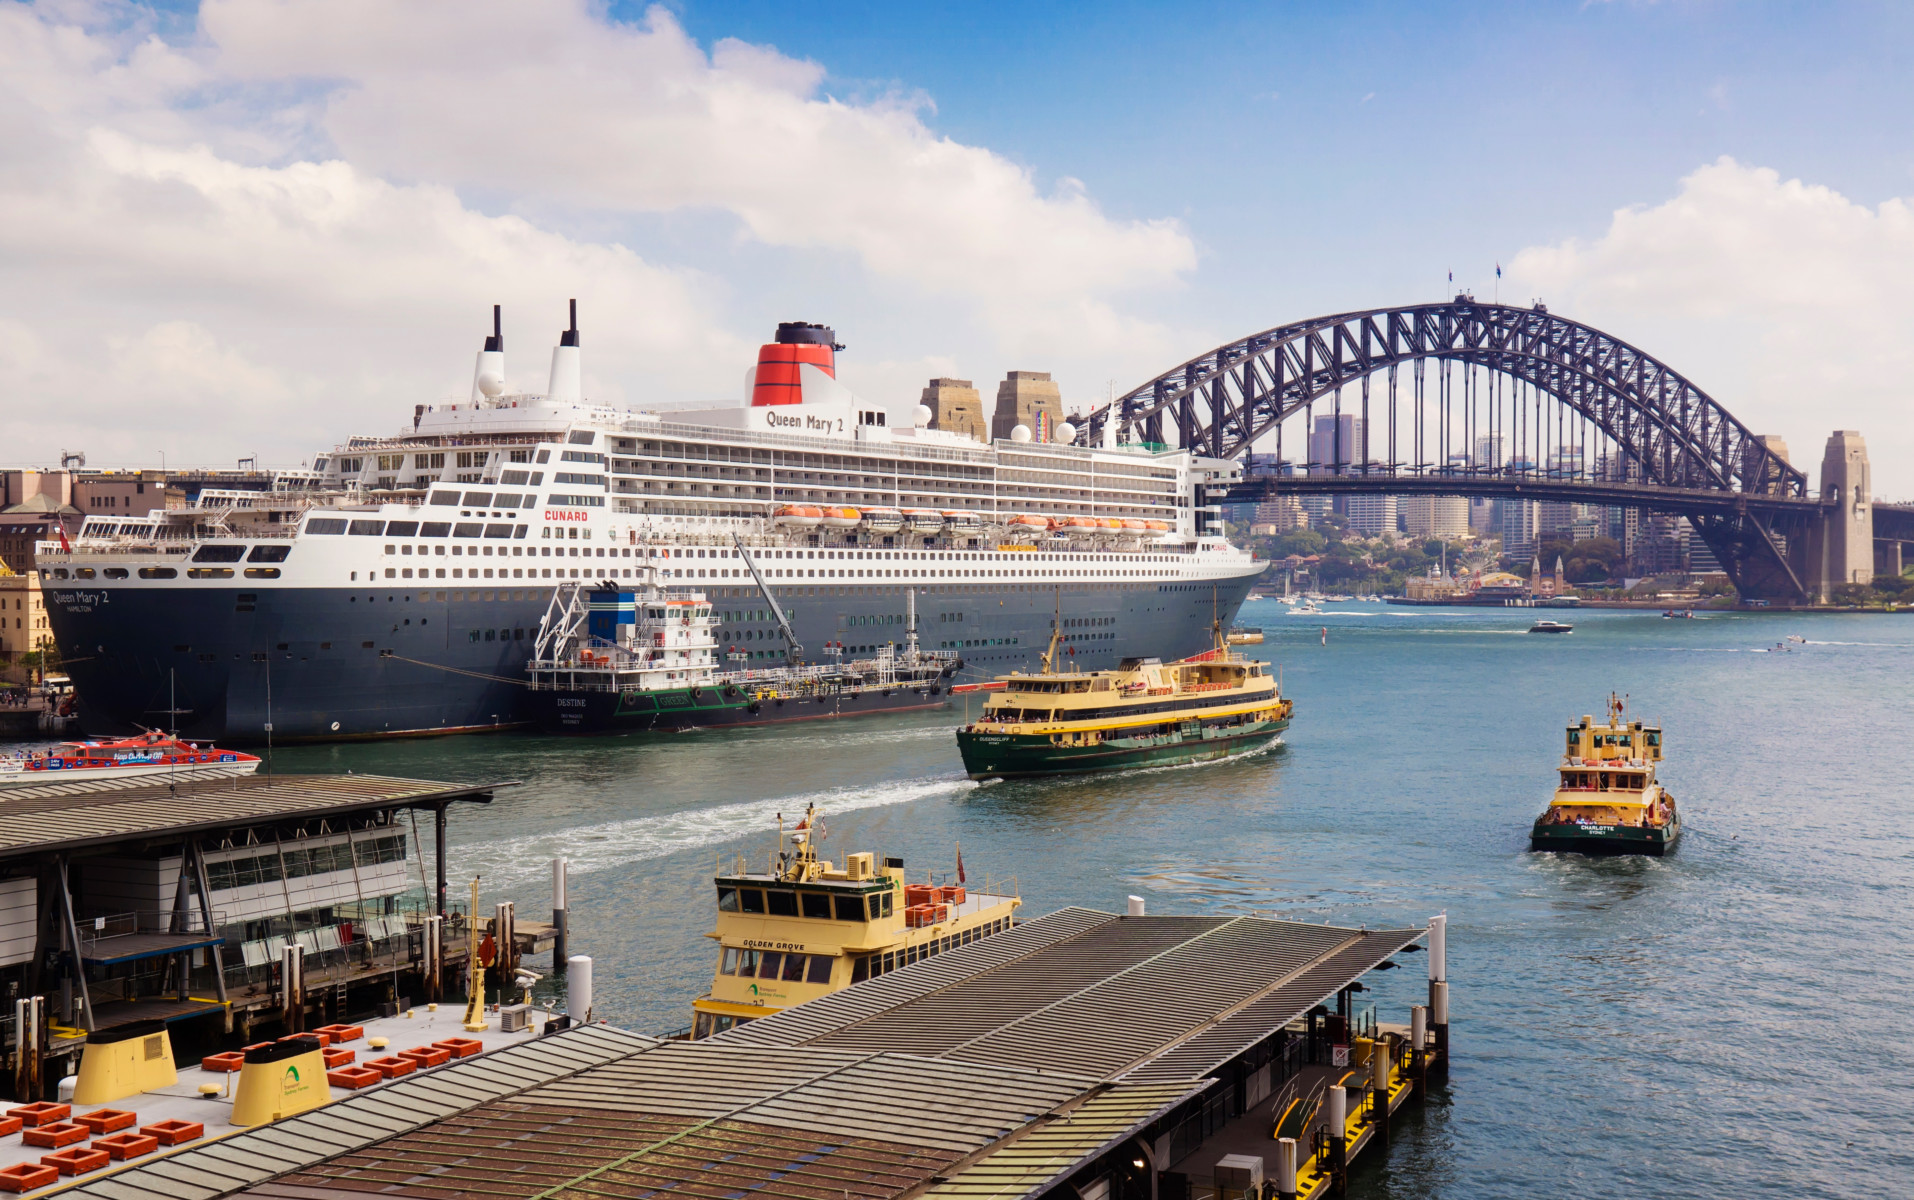 The Queen Mary 2 has since departed Australia, leaving the passengers behind